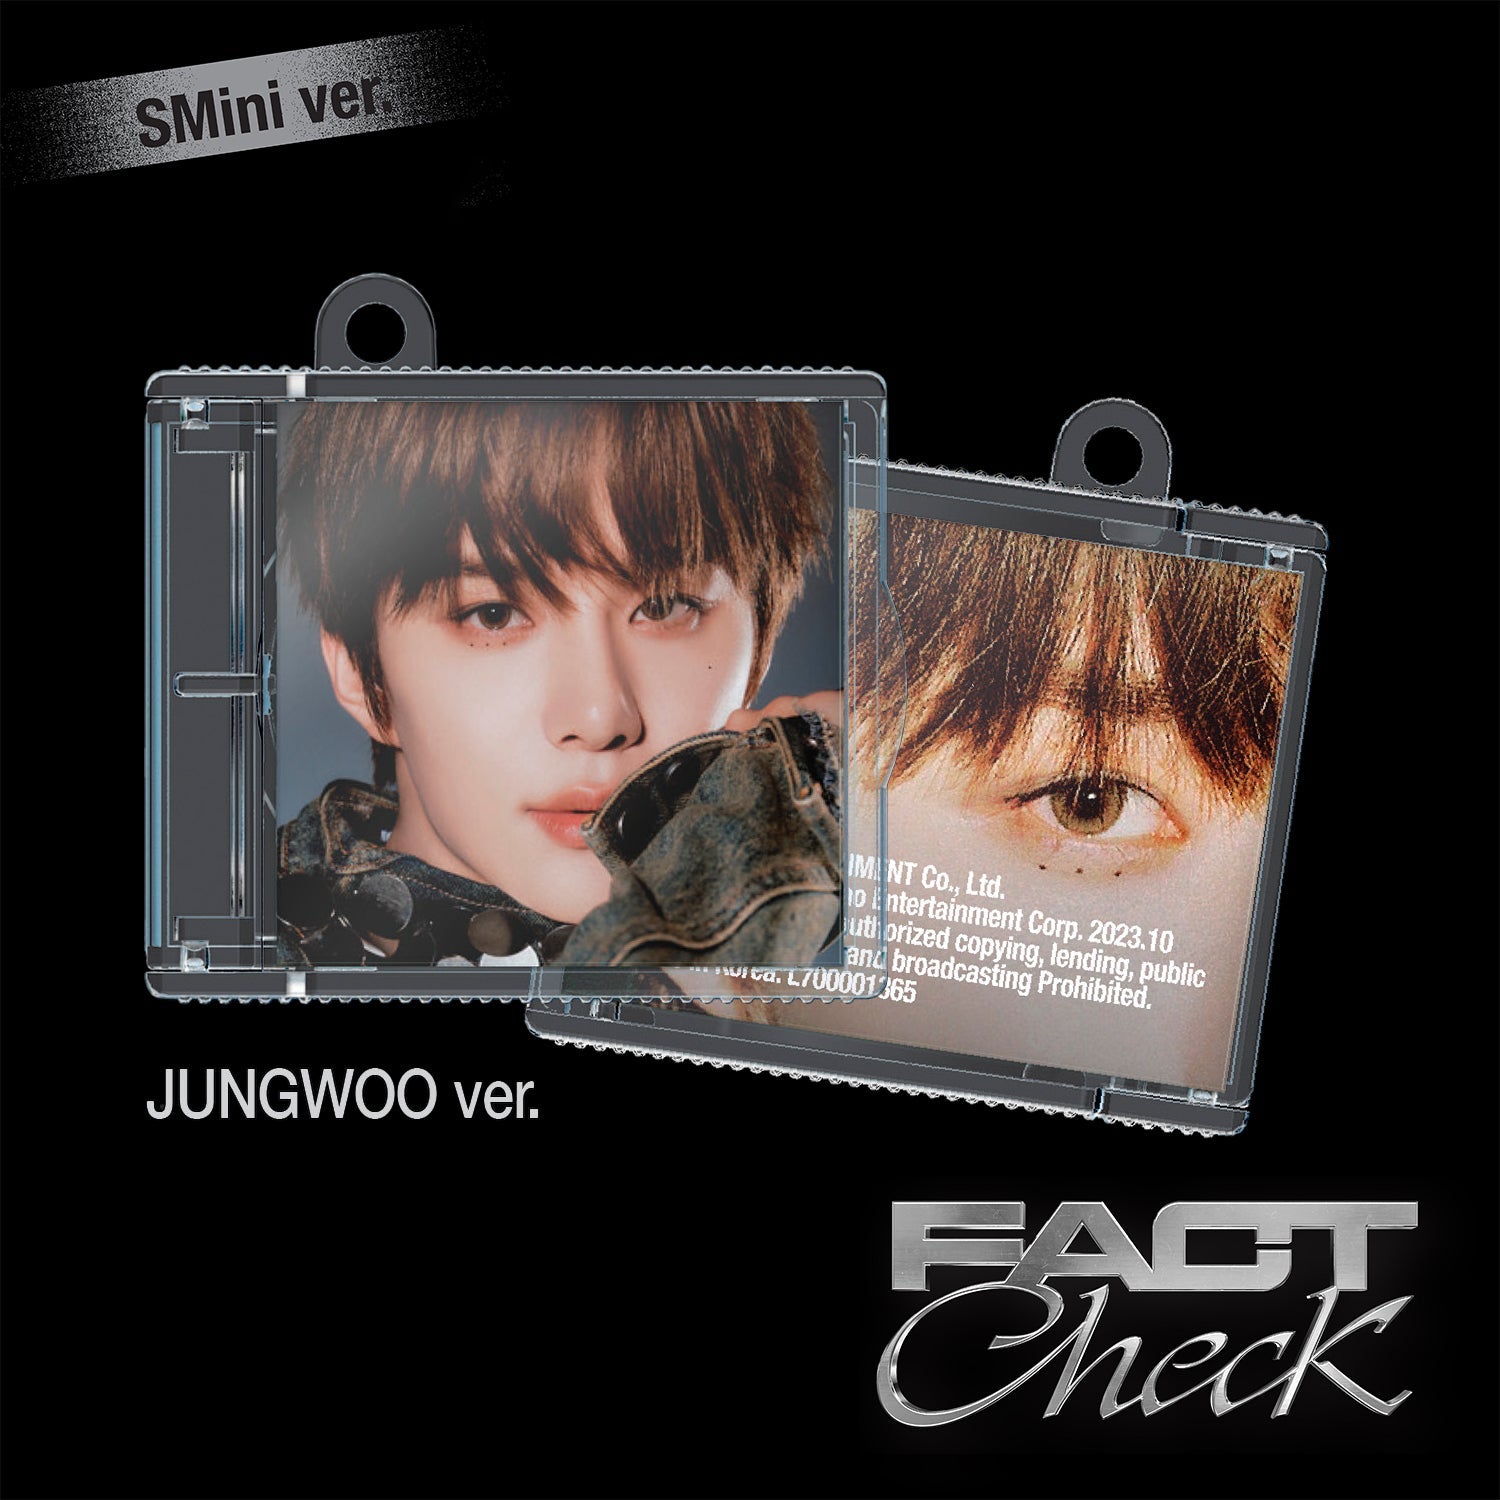 NCT 127 5TH ALBUM 'FACT CHECK' (SMINI) JUNGWOO VERSION COVER